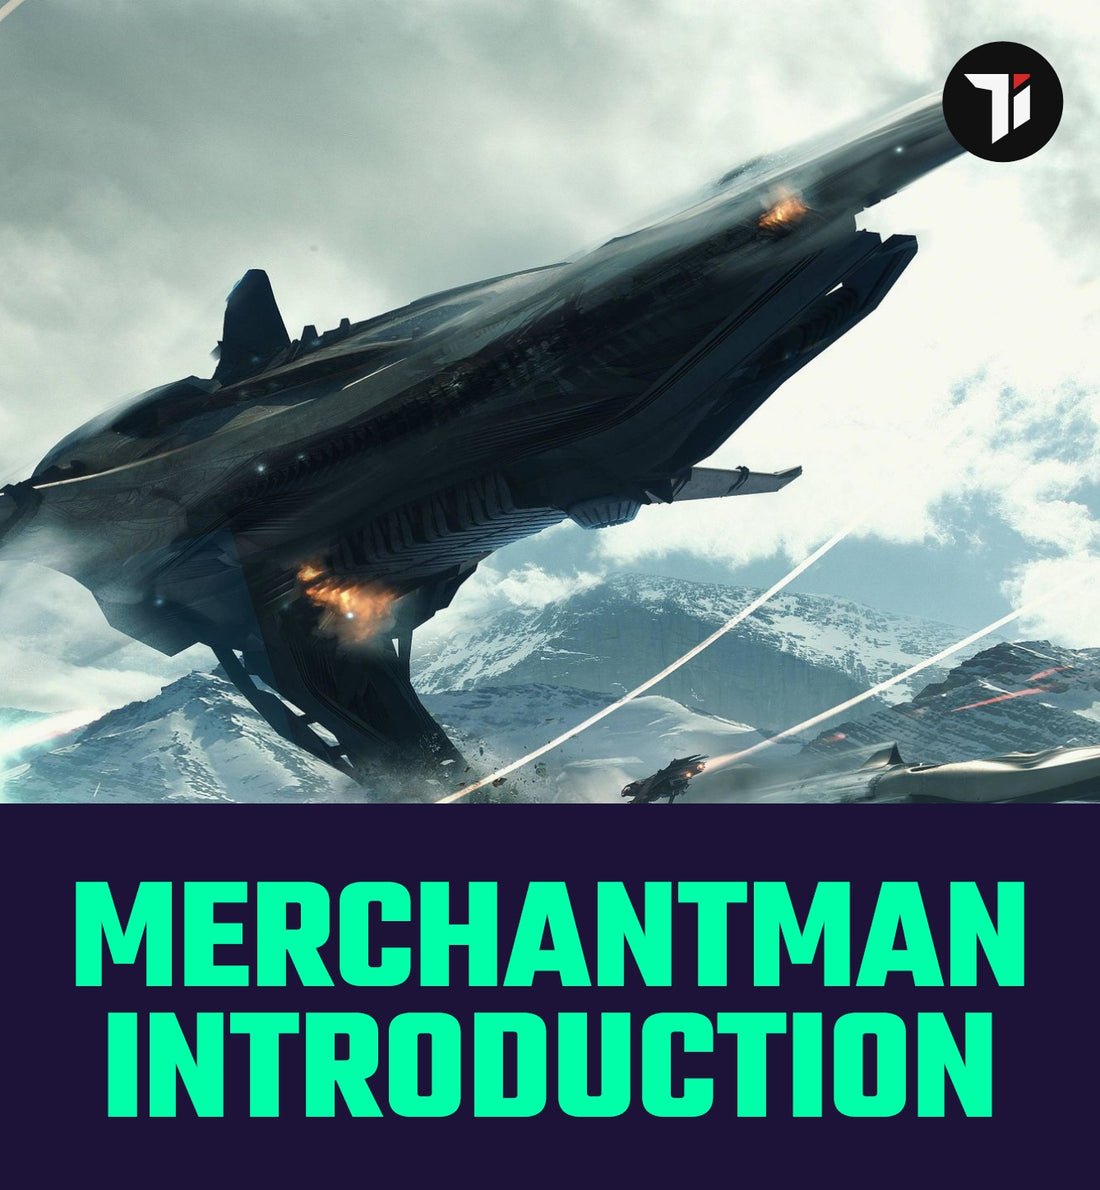 Banu merchantman Quick Ship Introduction - Learn more about the Merchantman Star Citizen Ship in this quick guide/introduction